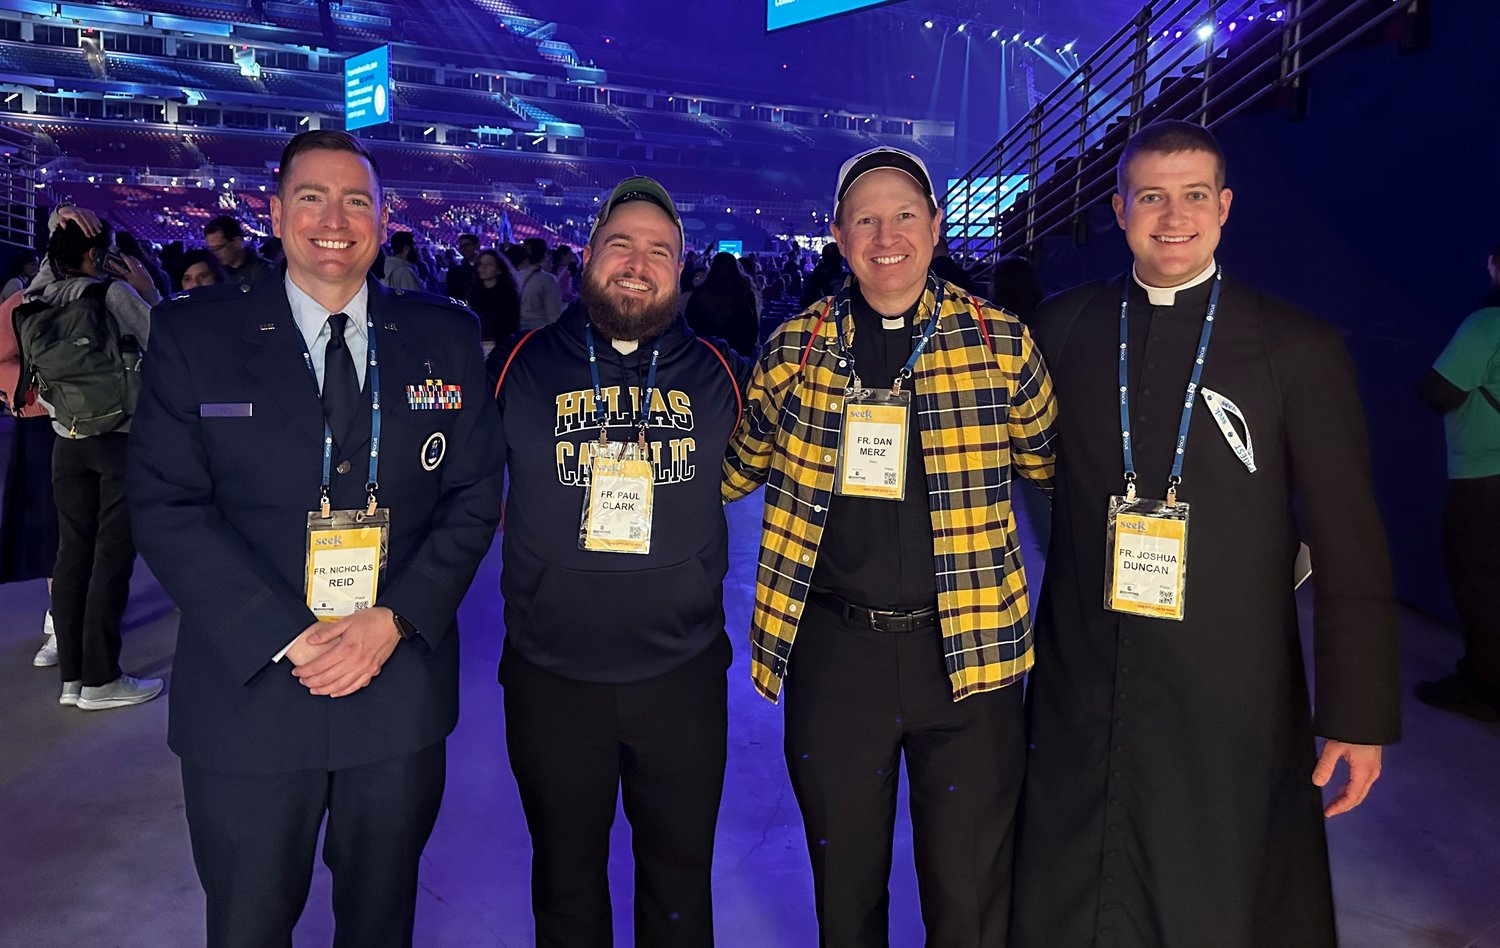 Father Nicholas Reid, a priest of the diocese who’s serving as an Air Force chaplain in San Antonio, Texas; Father Paul Clark, chaplain of Helias Catholic High School and diocesan vocation director, director of seminarians and moderator of youth and young adult ministry; Father Daniel Merz, pastor of St. Thomas More Newman Center Parish in Columbia; and Father Joshua Duncan, pastor of St. Mary Parish in Glasgow and St. Joseph Parish in Fayette gather for a photo at the SEEK23 conference in St. Louis.